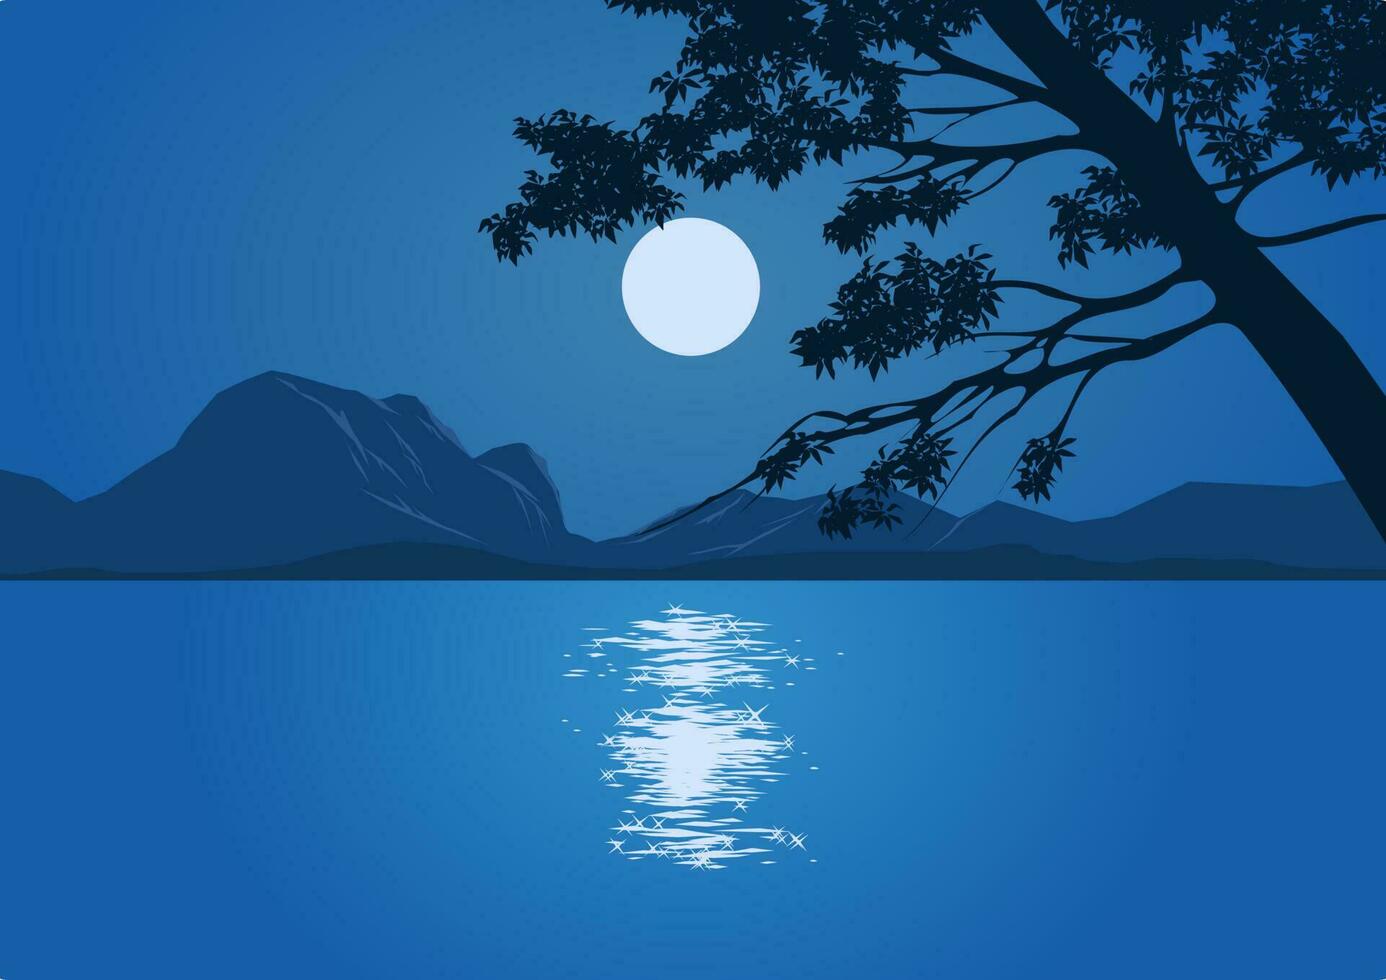 Beautiful tranquil night illustration with full moon over lake and silhouette of a tree vector